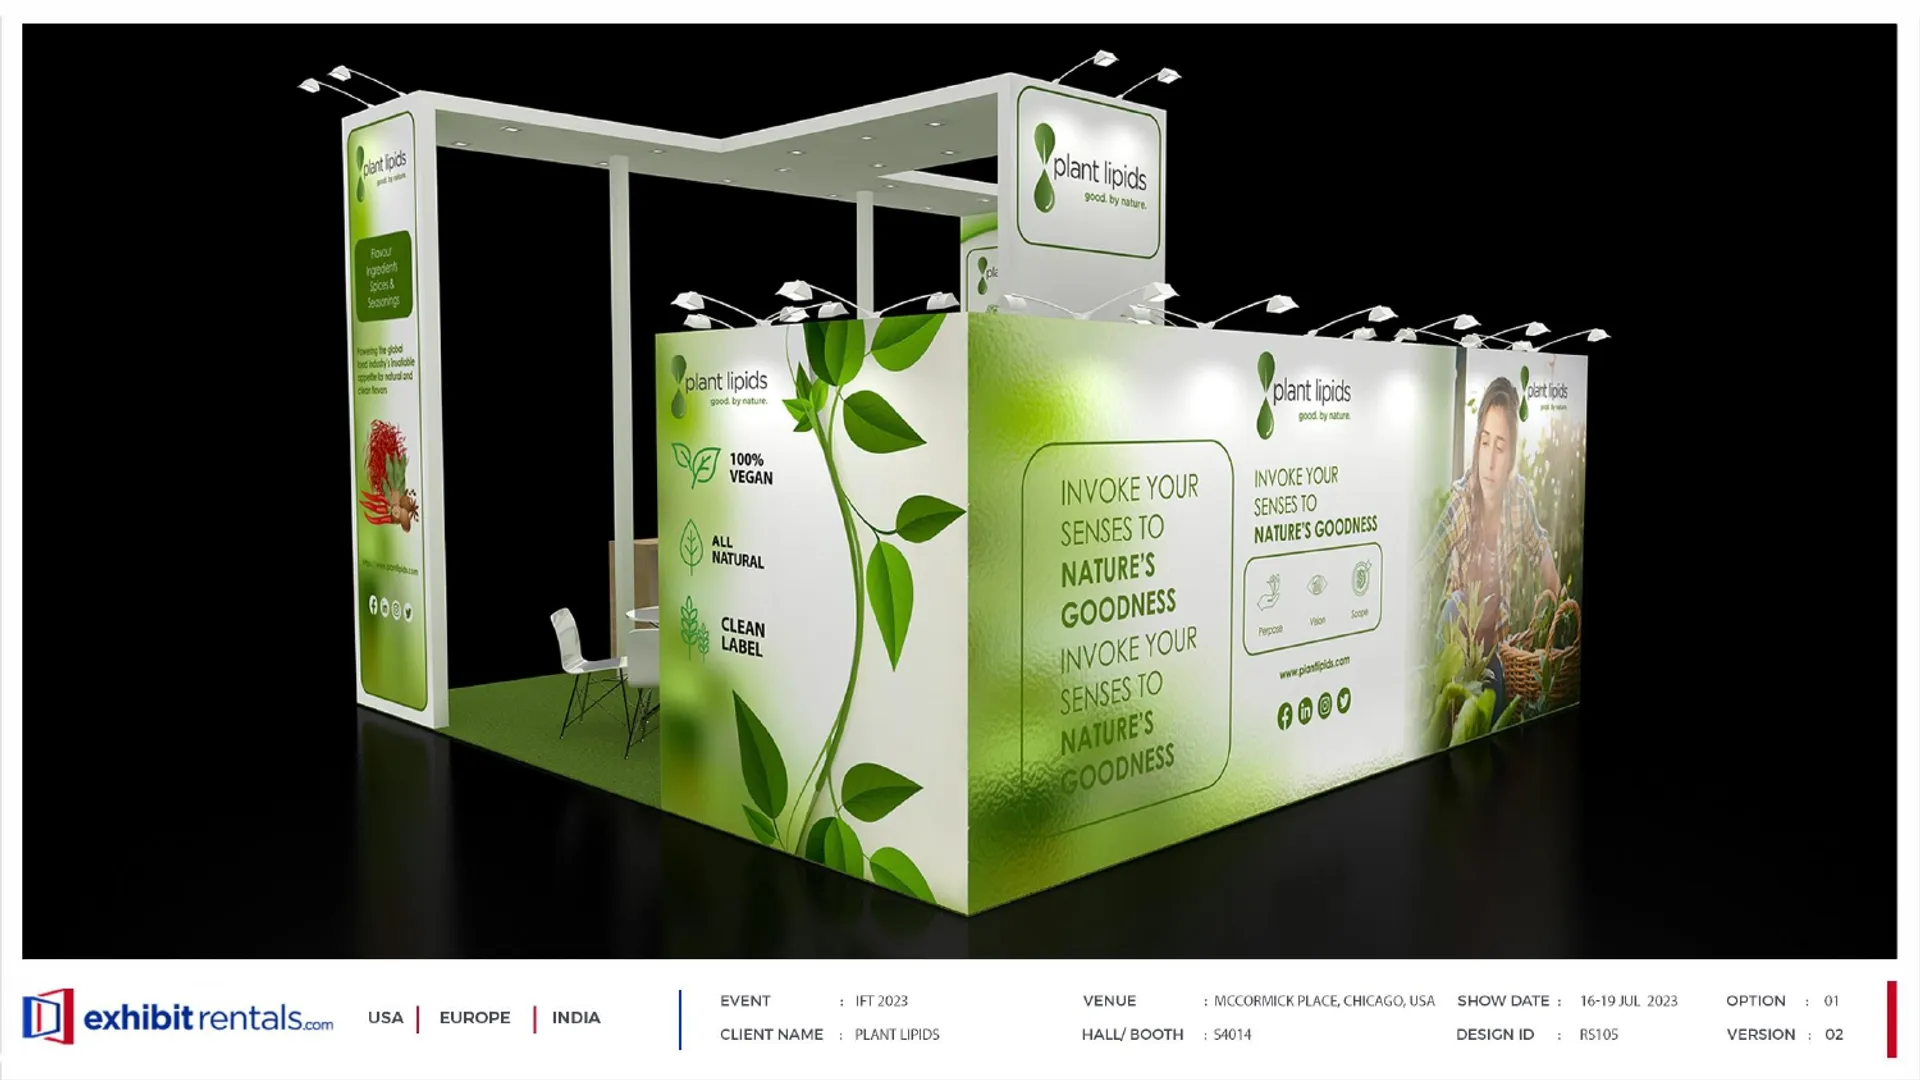 booth-design-projects/Exhibit-Rentals/2024-04-17-20x20-ISLAND-Project-105/1.2_Plant Lipids_IFT 2023_ER design presentation -16_page-0001-na9rqp.jpg